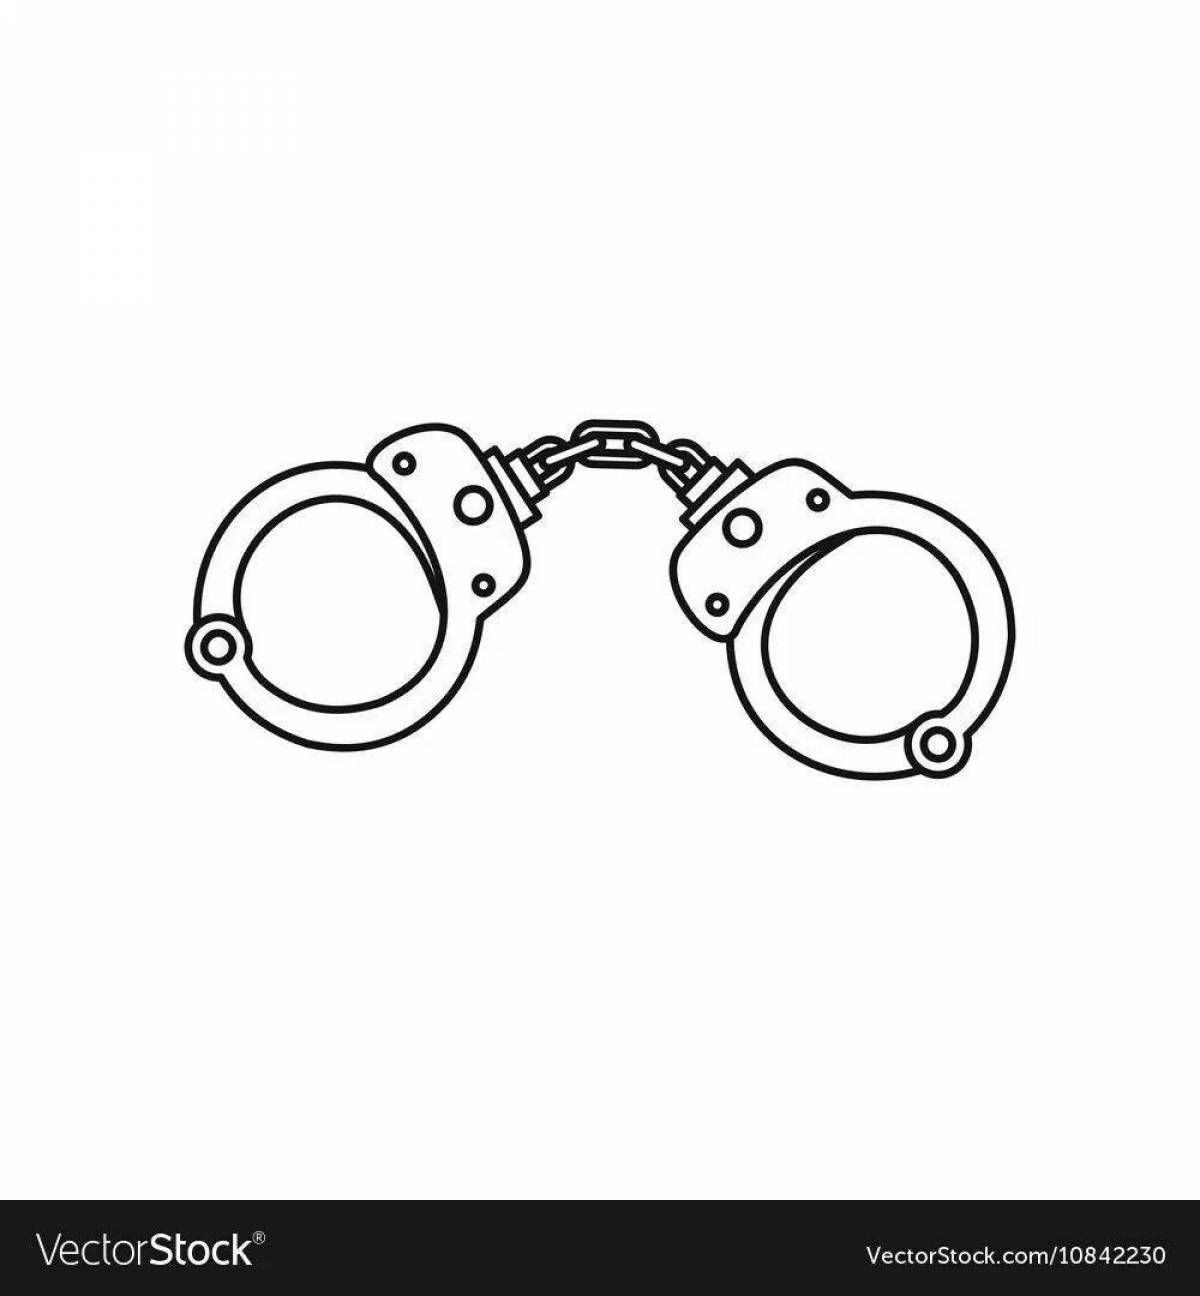 Coloring page adorable handcuffs